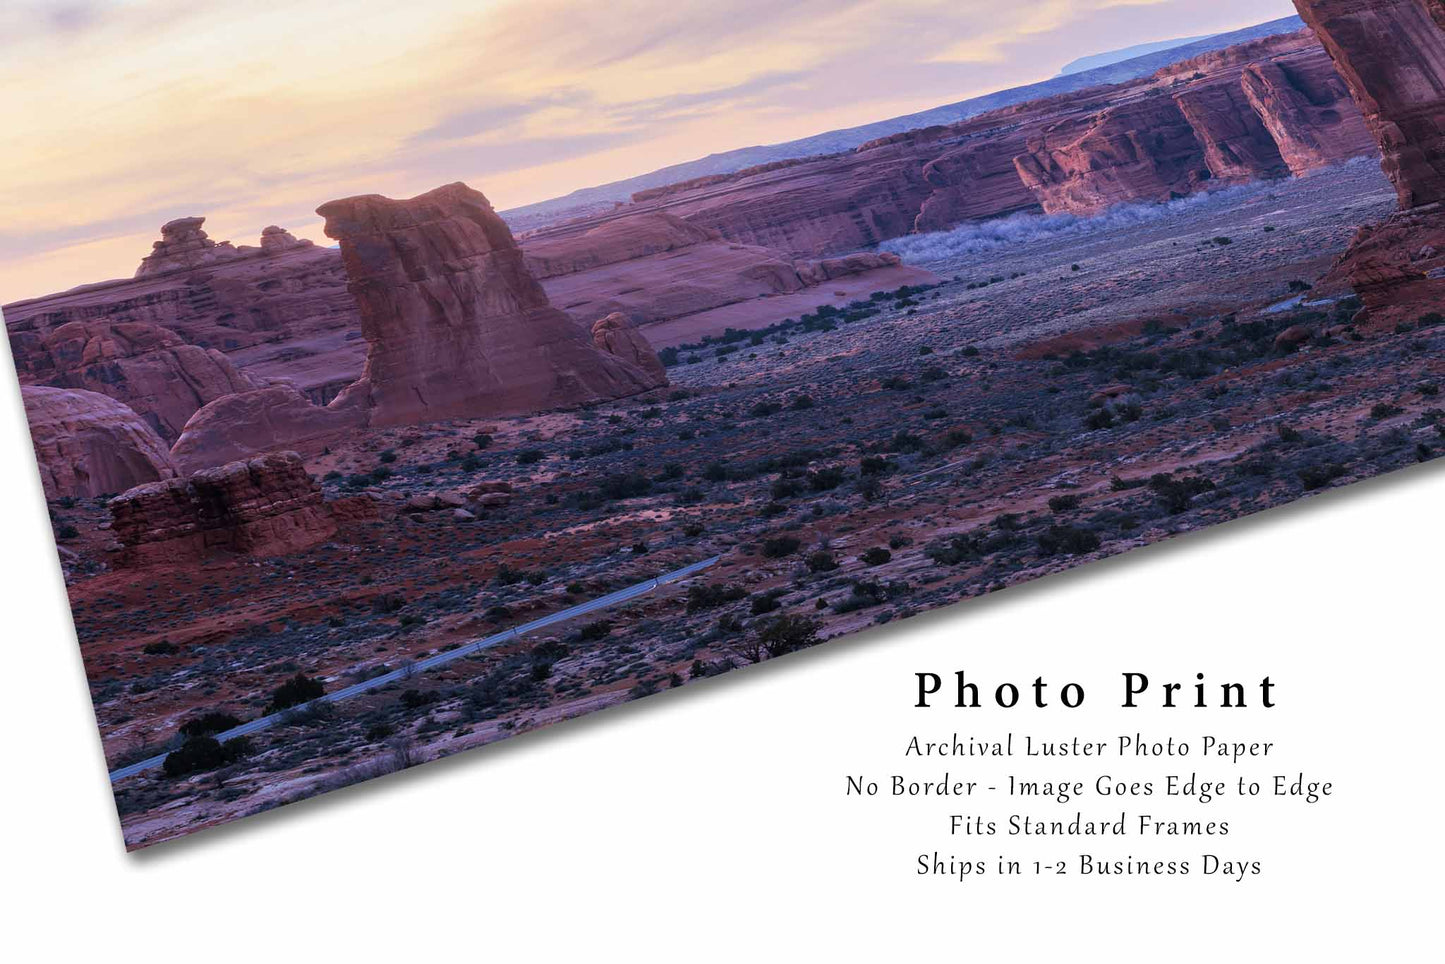 Southwestern Photography Print - Picture of Sandstone Cliff Walls at Sunset in Arches National Park Utah Desert Wall Art Western Decor